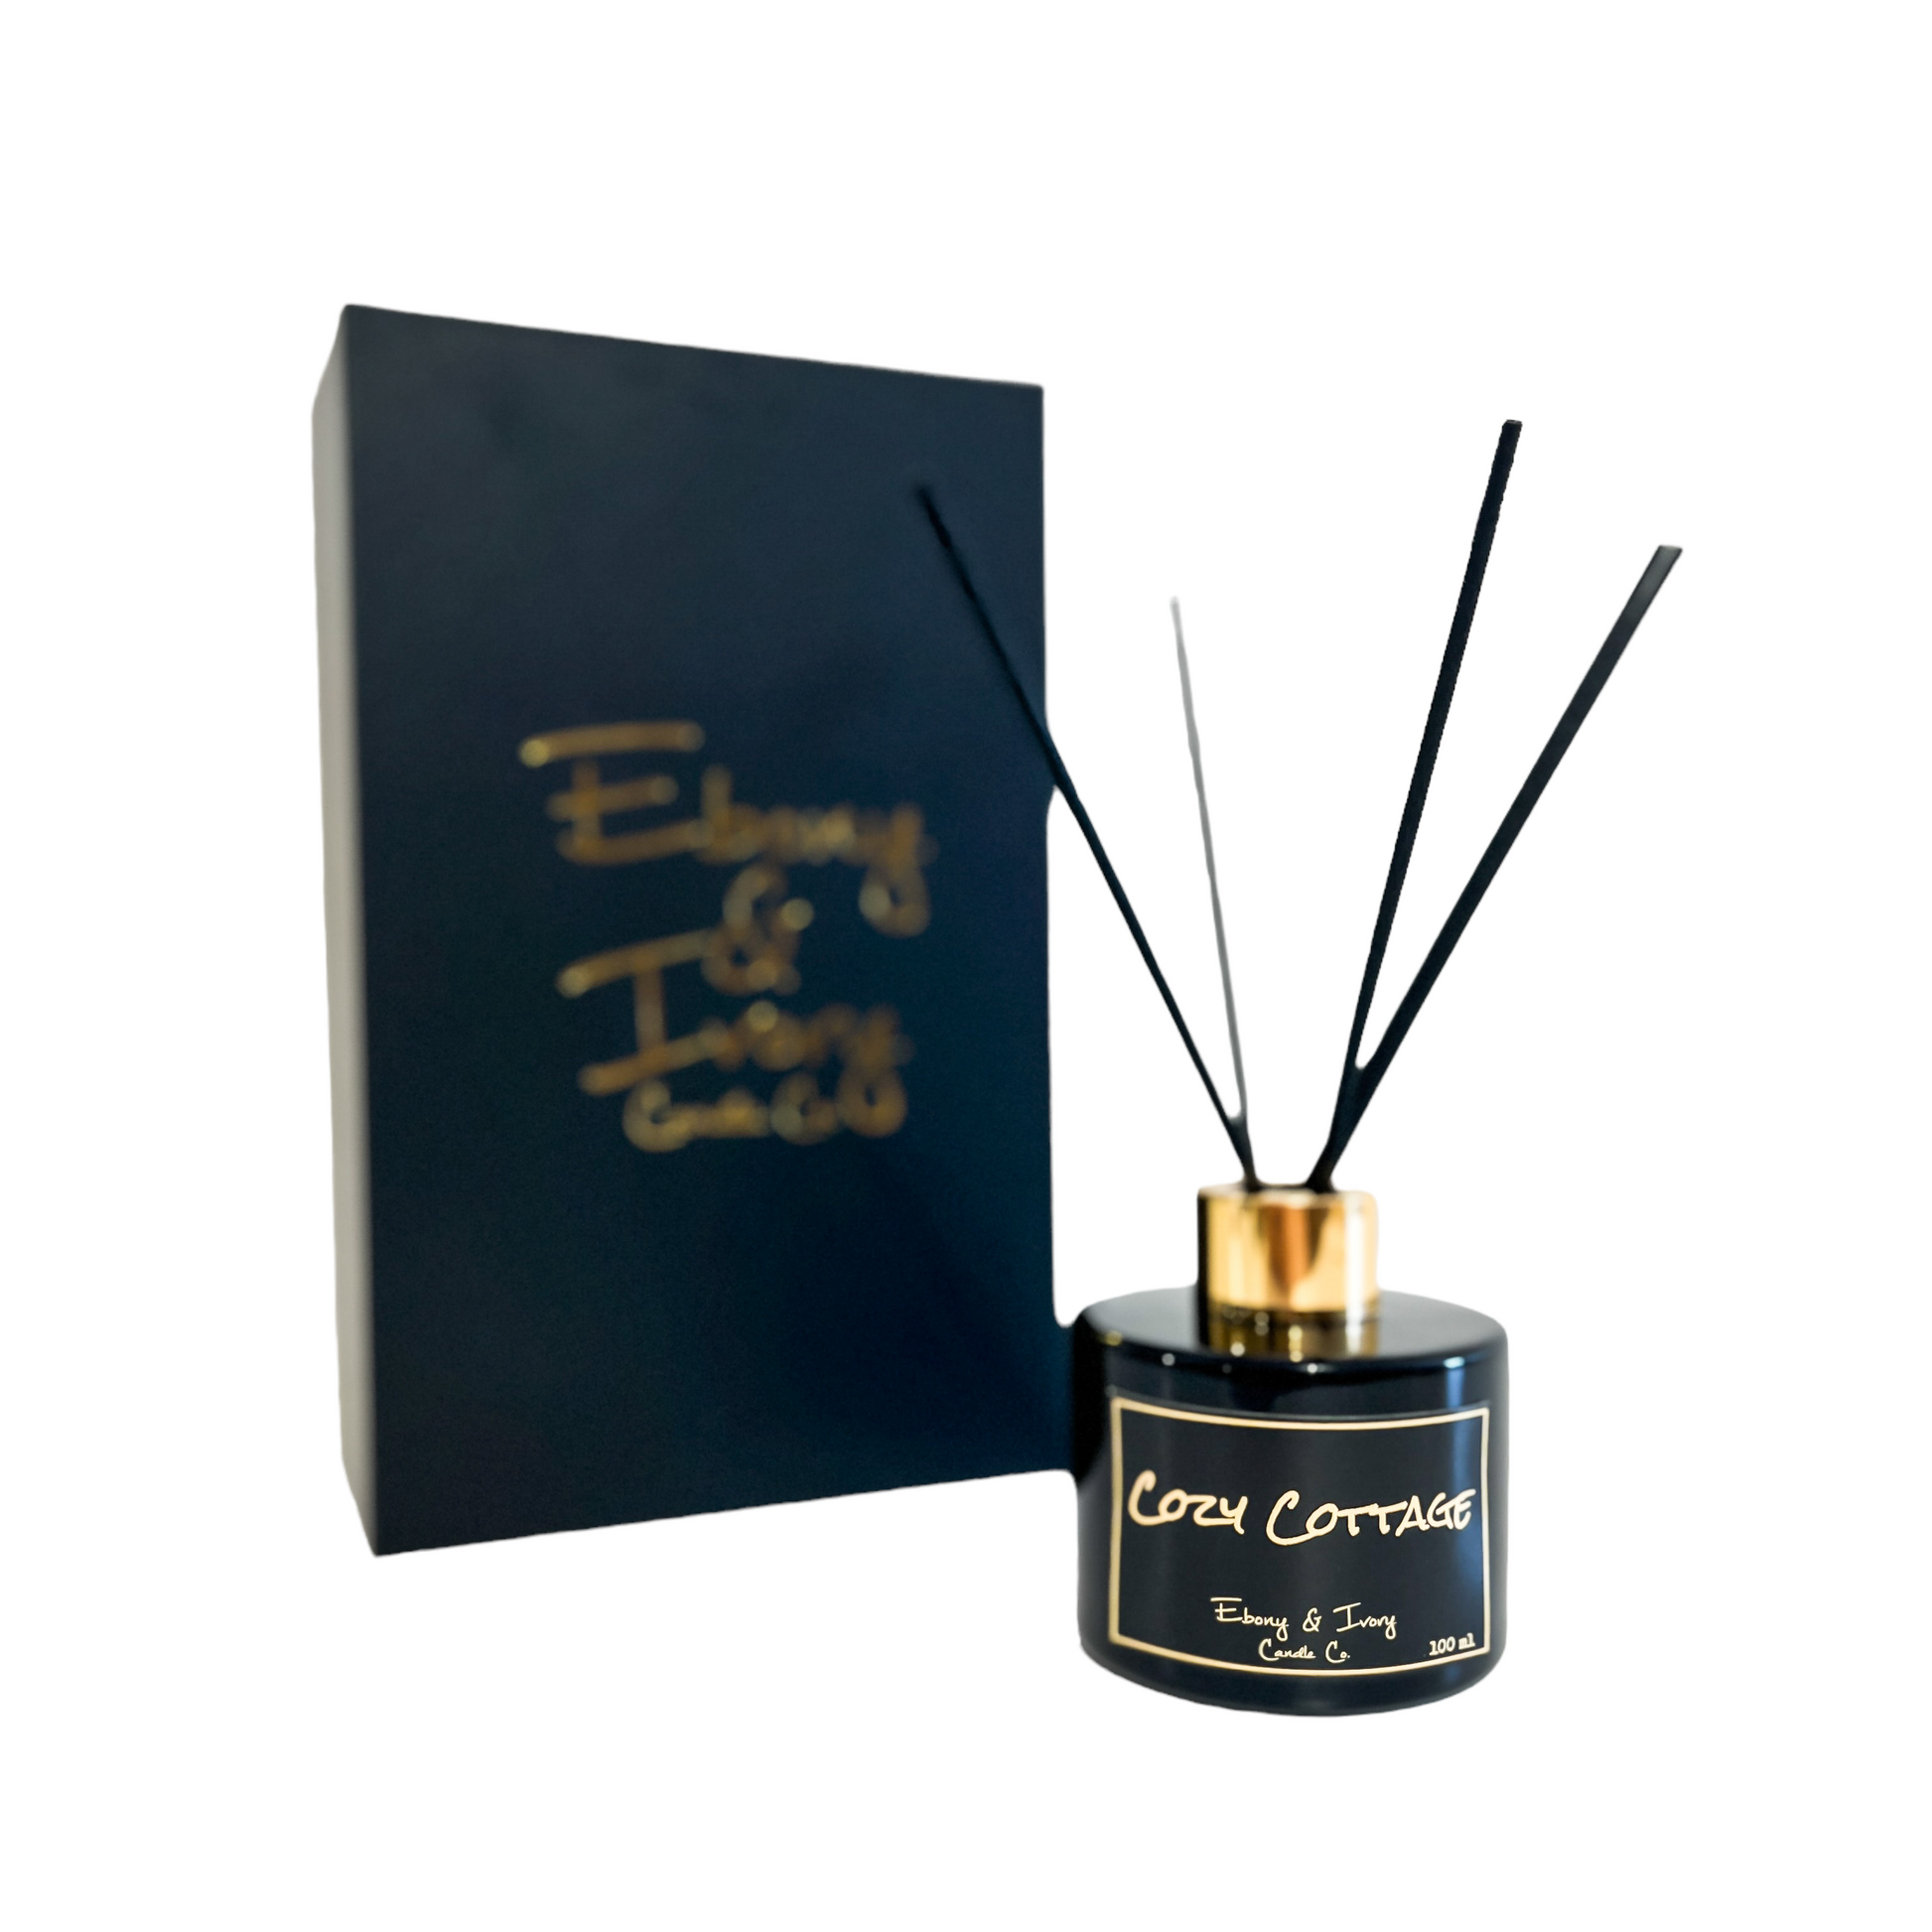 Black, one hundred milliliters, frozen pine, warm spice, and brown sugar scented reed diffuser with a gold lid and a black label that reads Cozy Cottage